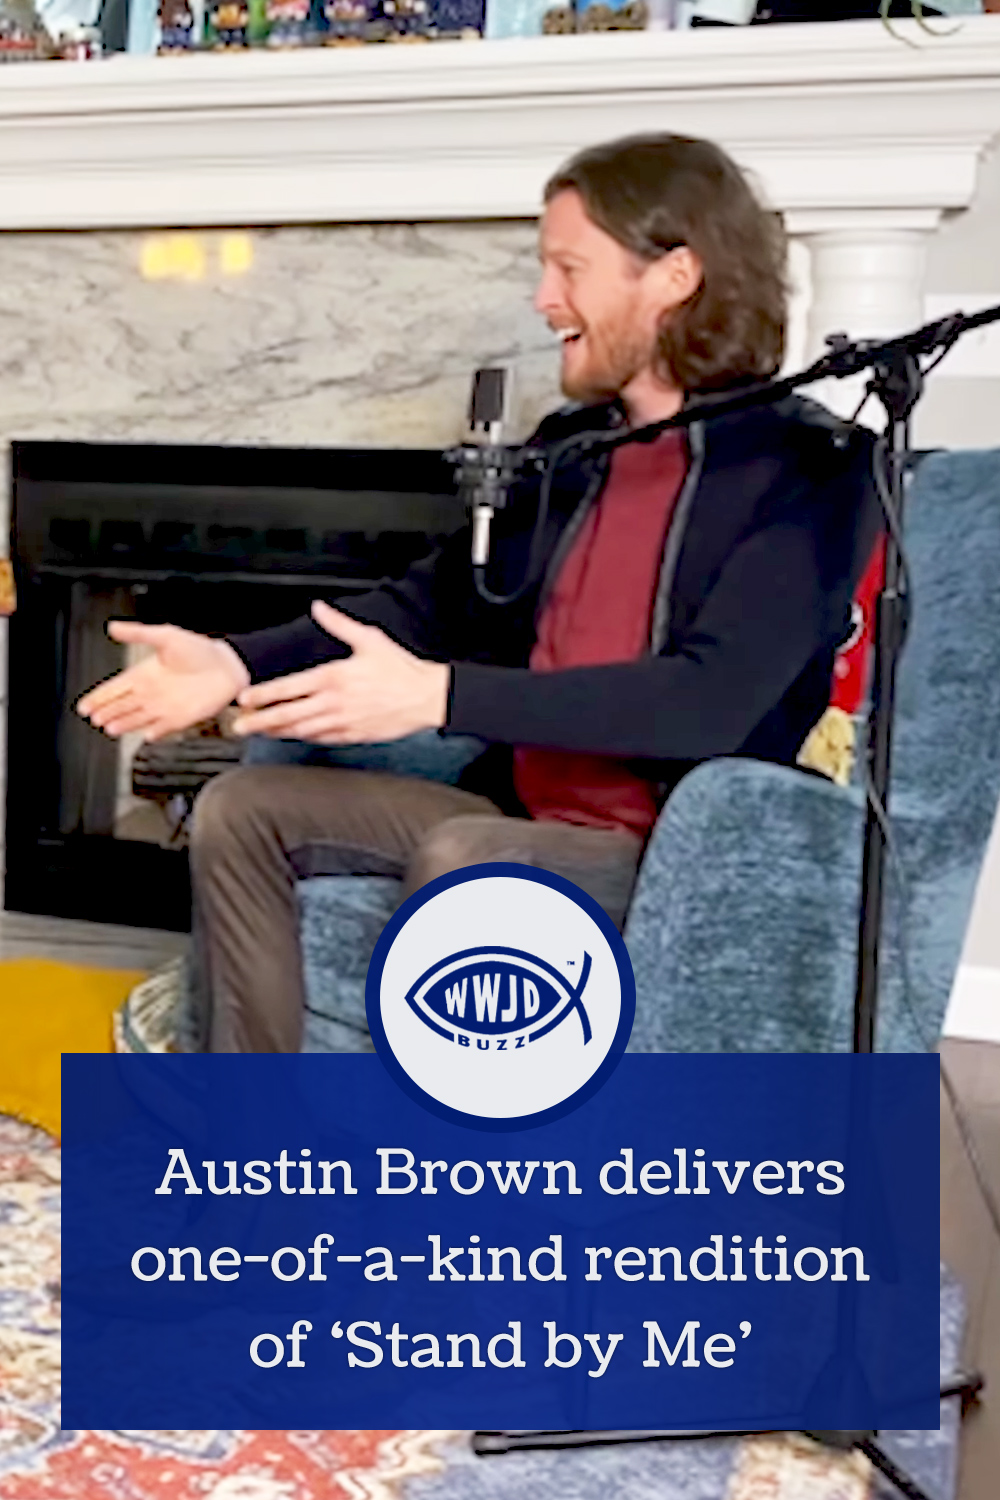 Austin Brown delivers one-of-a-kind rendition of ‘Stand by Me’